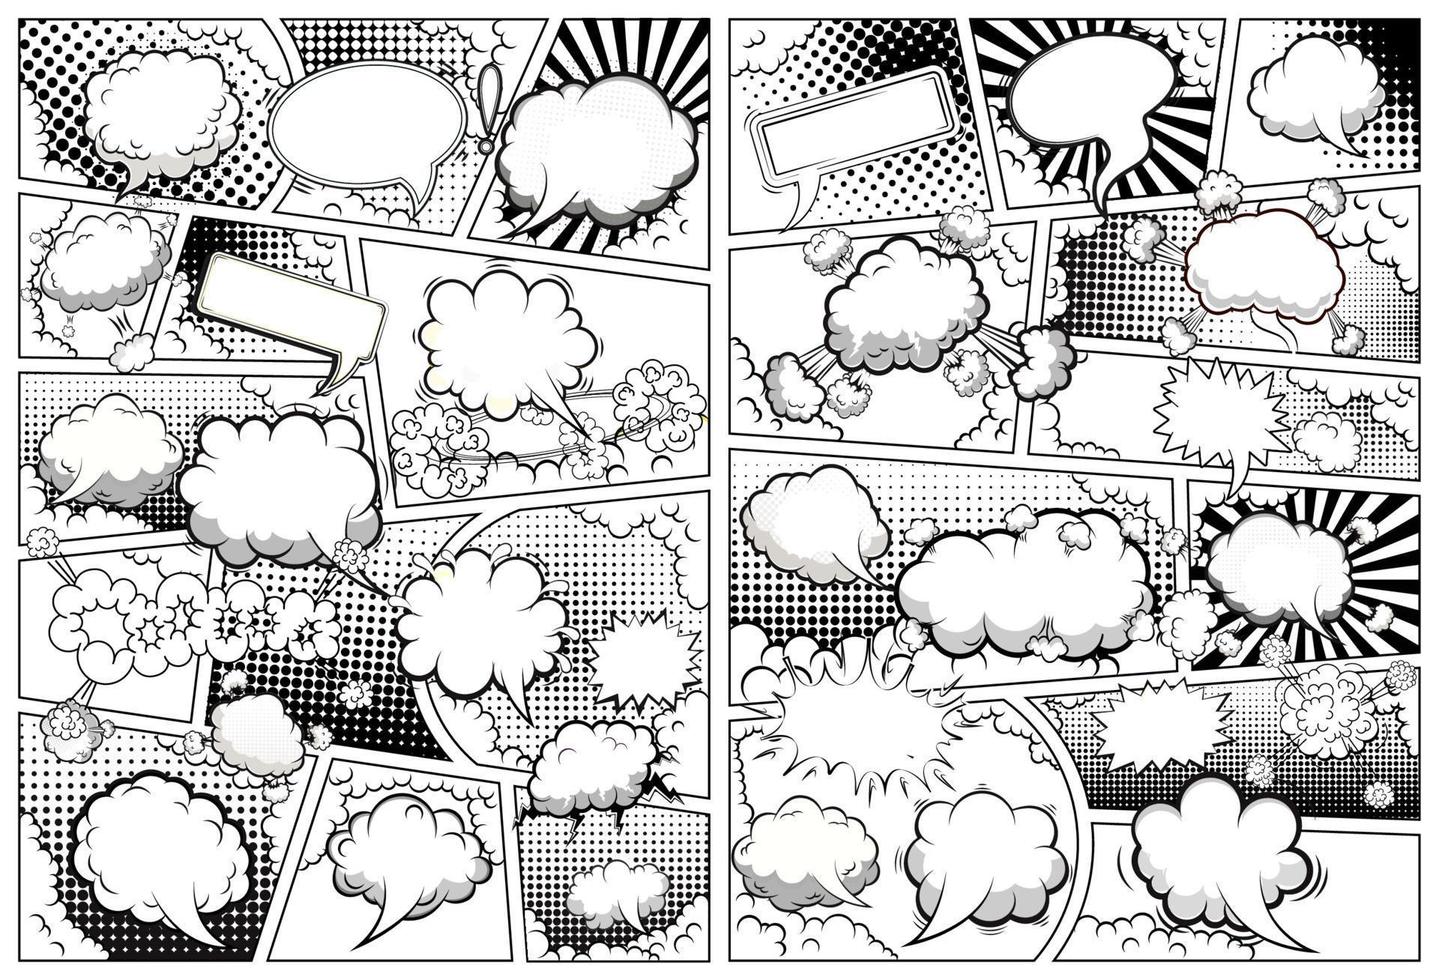 Comic book black and white page template divided by lines with speech bubbles. Vector illustration.